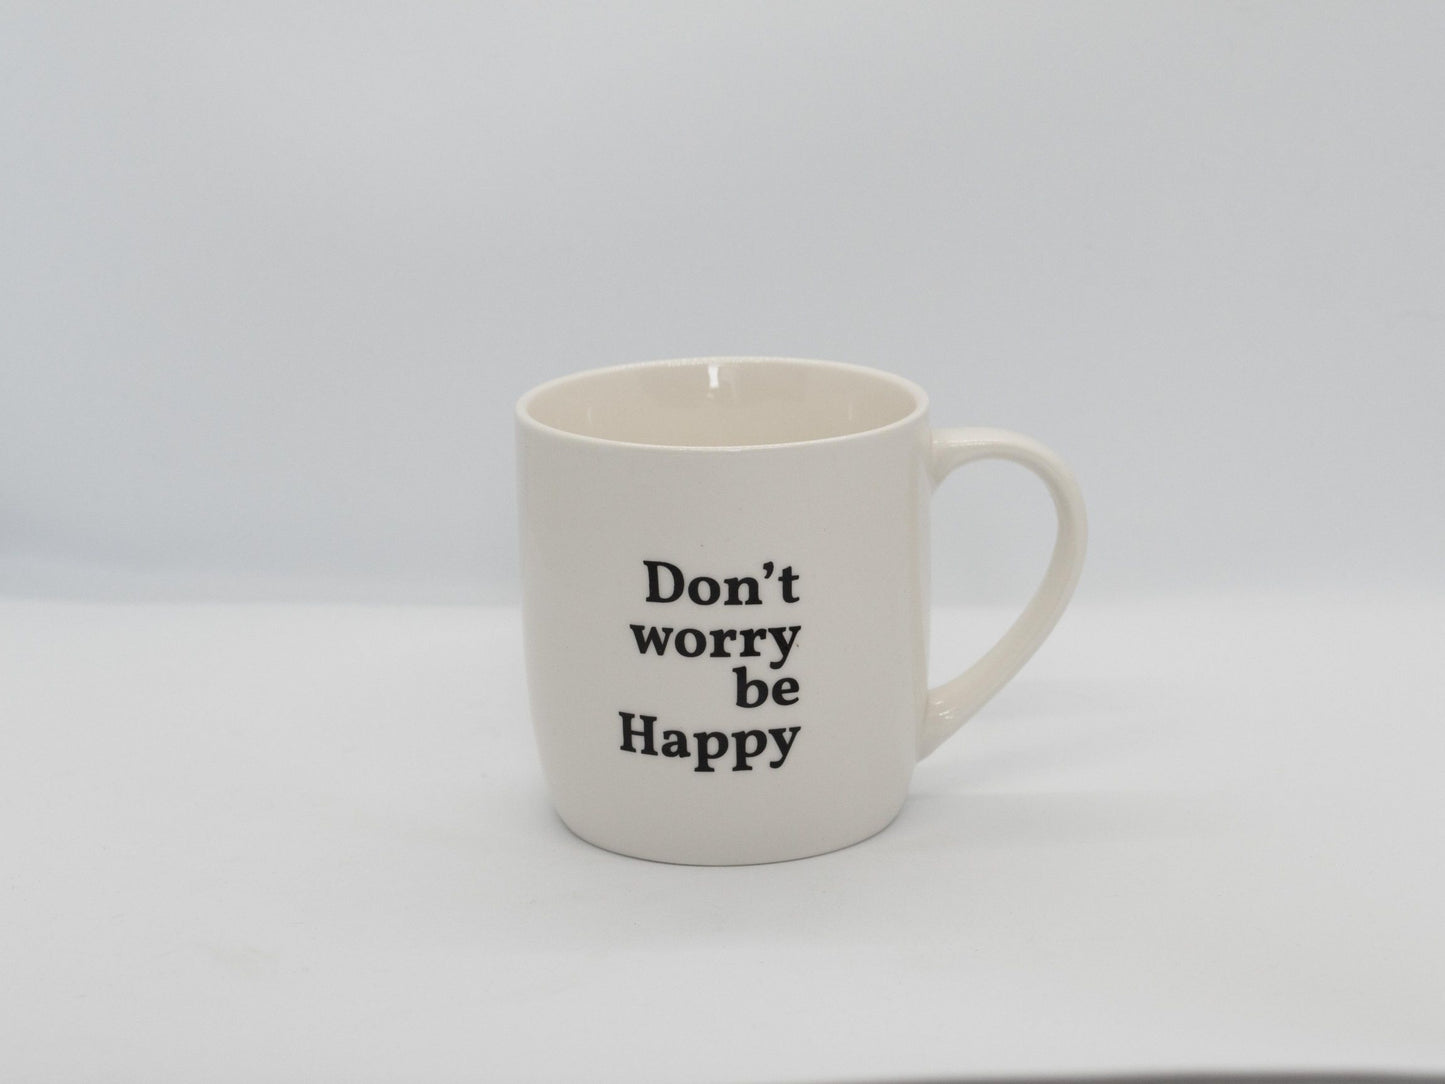 Tas/mok met quote 'Do More of What makes you Happy'